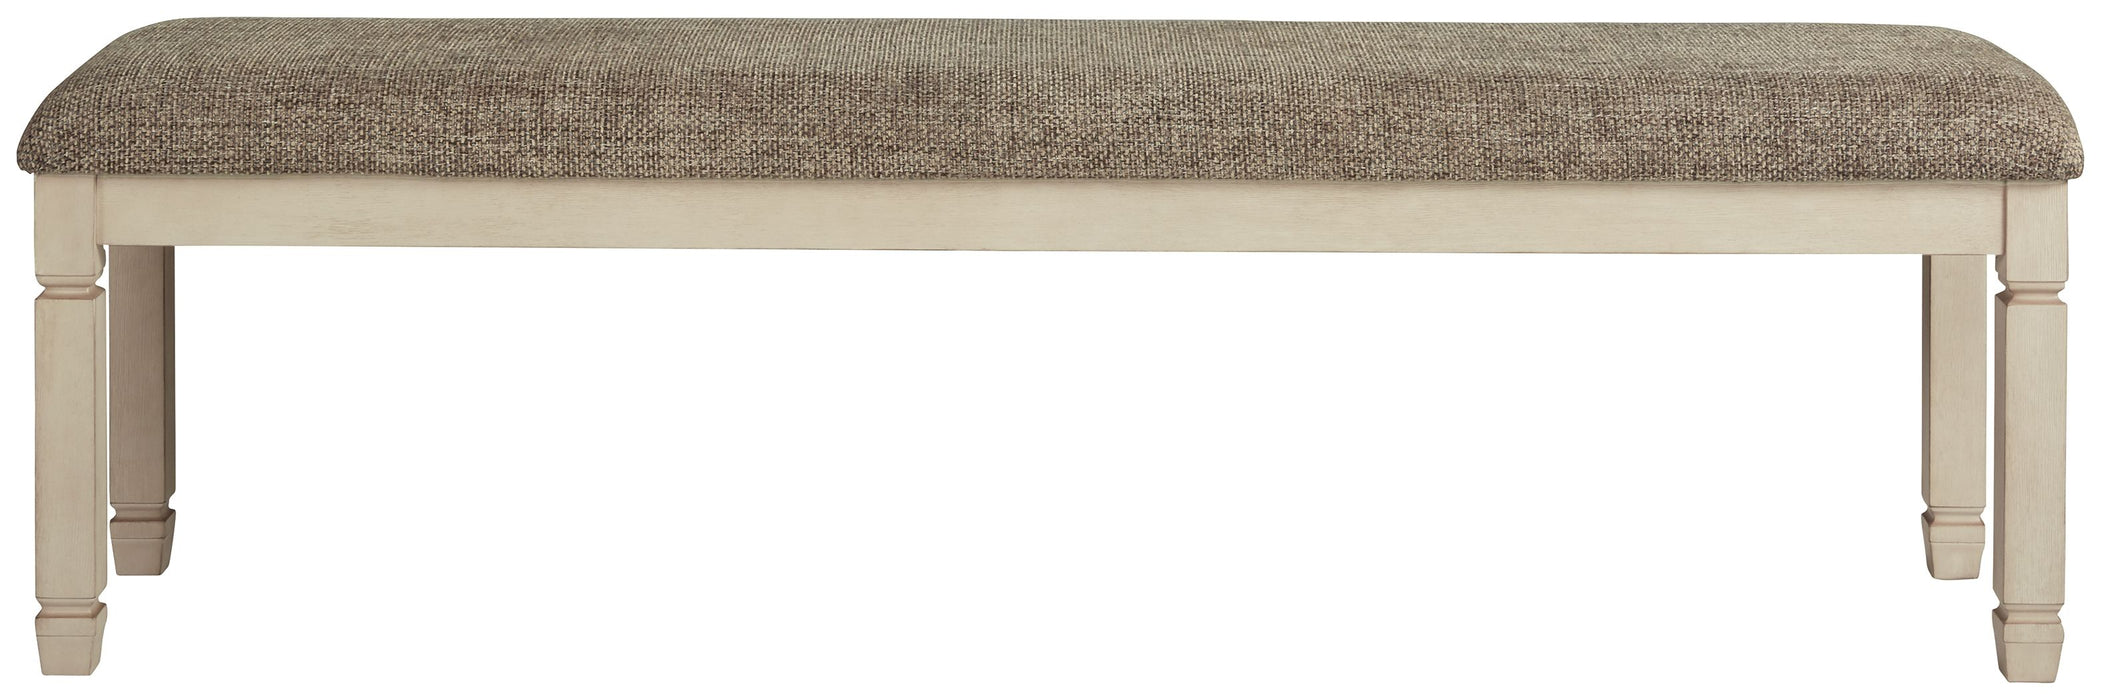 Bolanburg - Brown / Beige - Extra Large Uph Drm Bench Unique Piece Furniture